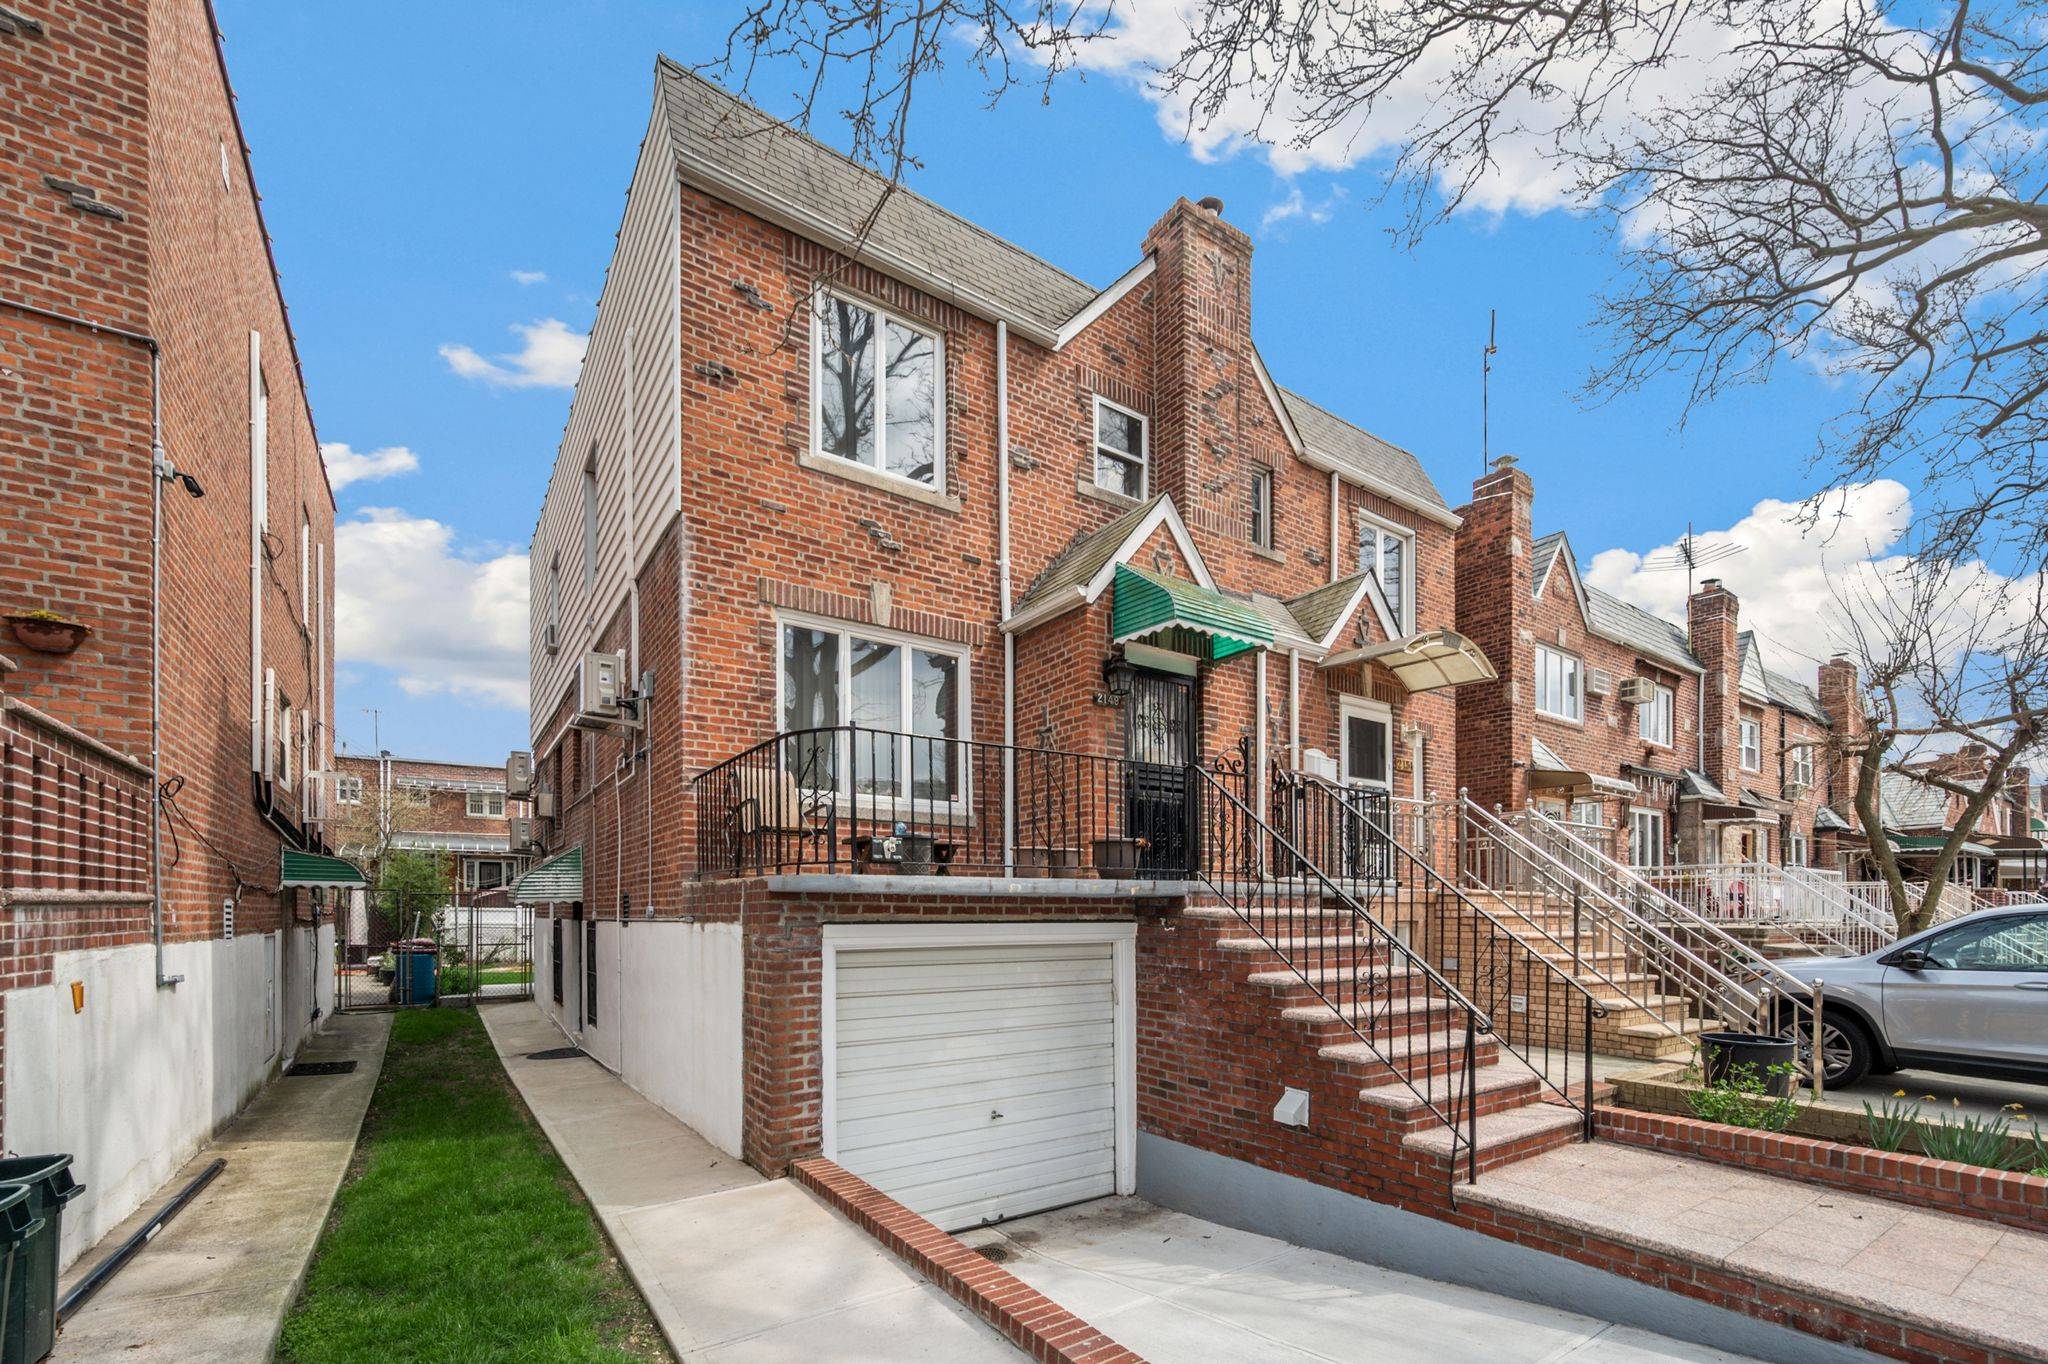 Welcome to 2149 East 28th Street, located in prime Sheepshead Bay this semi detached brick home is the perfect place to call home.